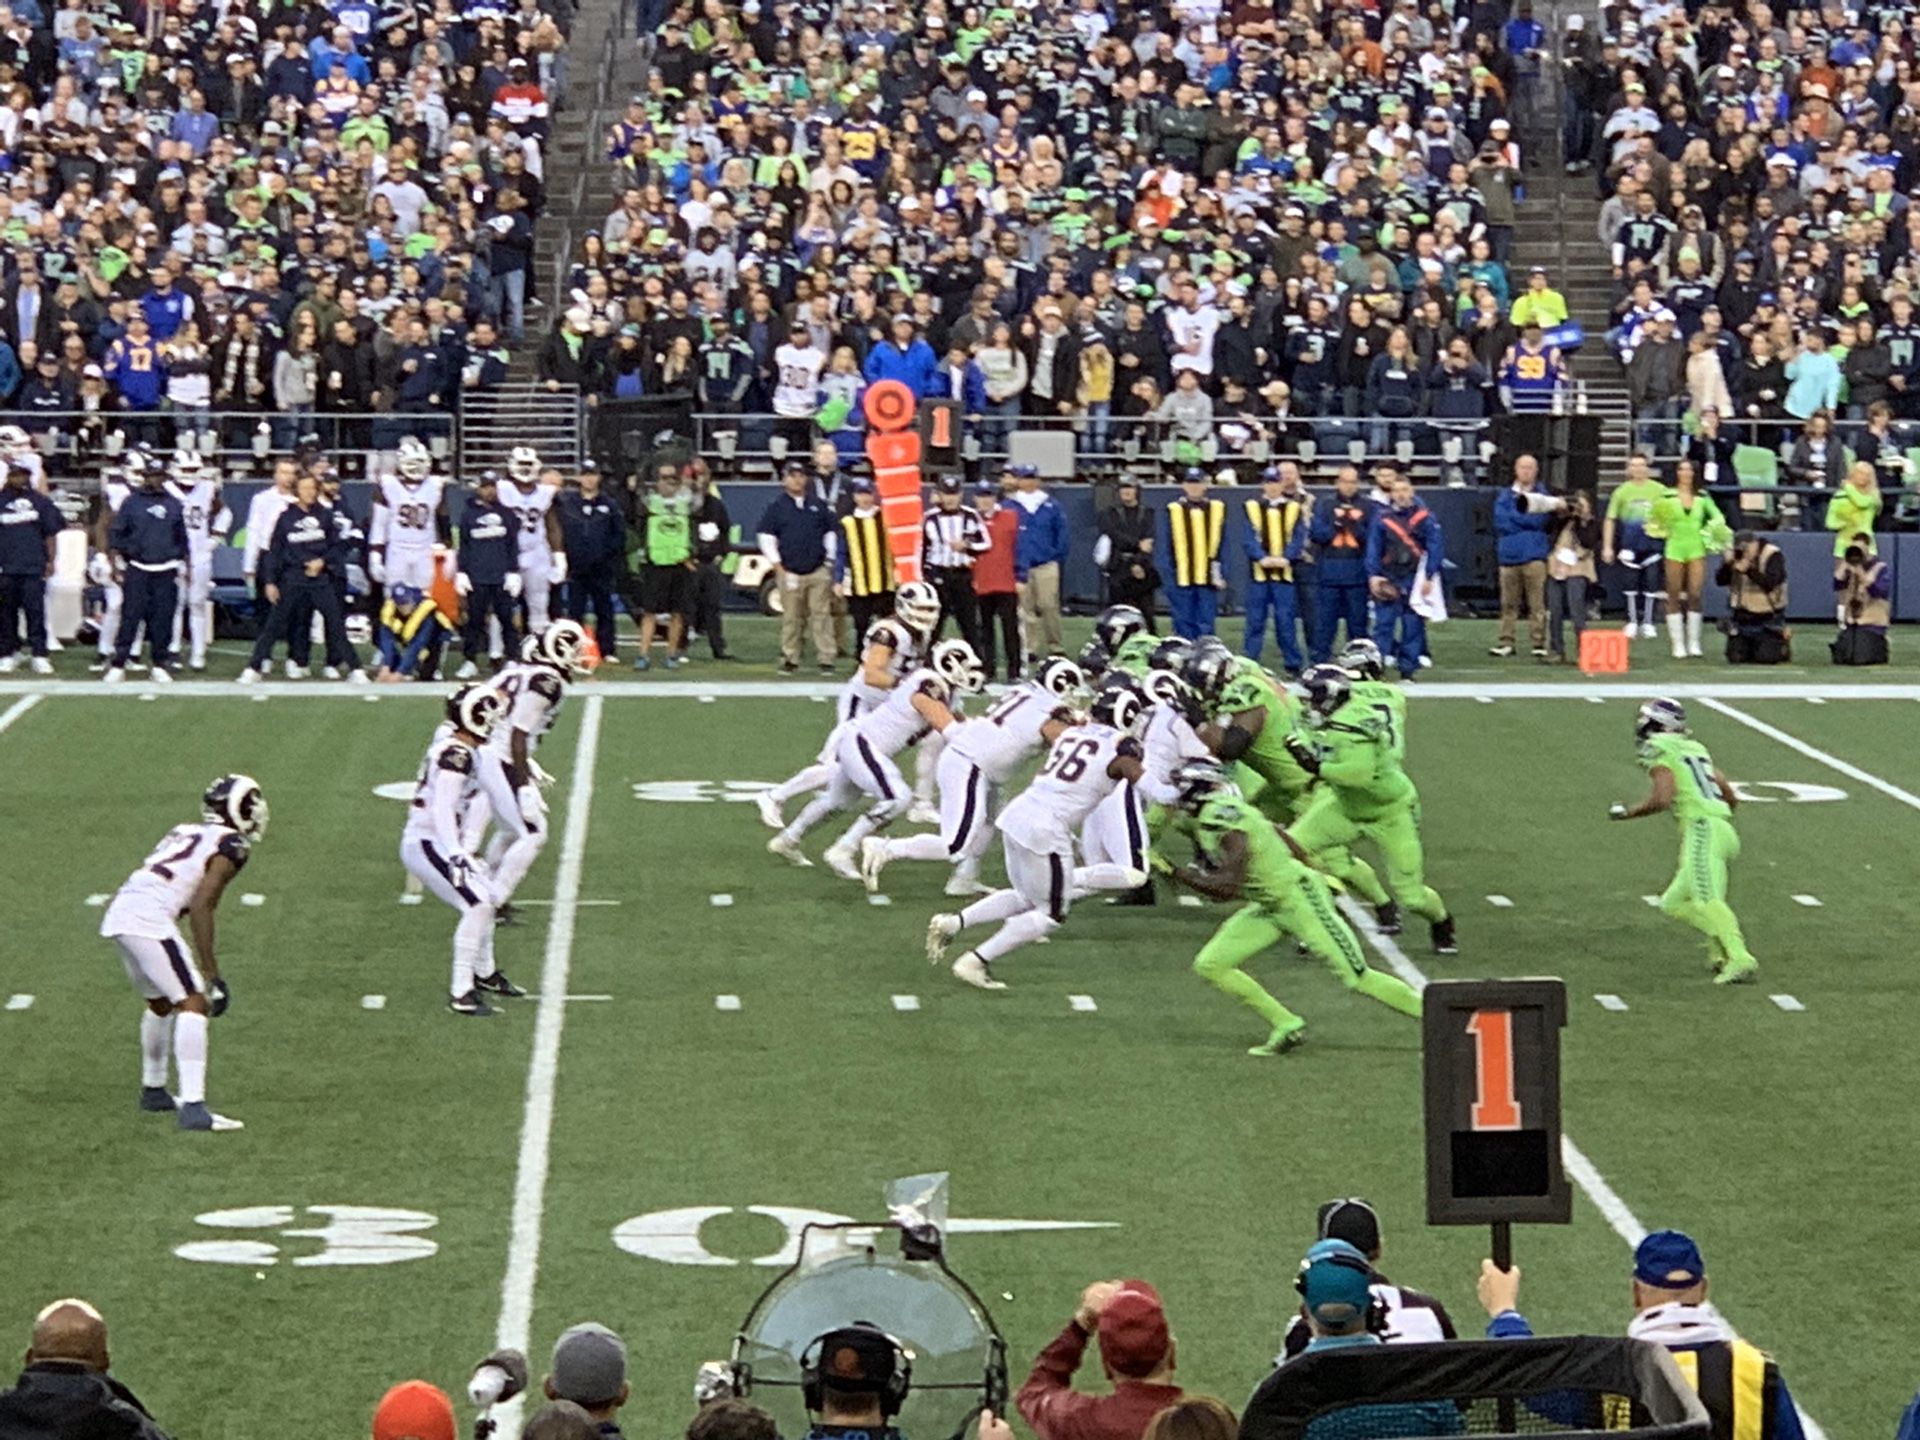 Seahawks -Ravens -October 20th at Centuryink -1:30 h Section 133- Row J seats 18-19. One of them is an end seat. :0 yard line Seahawks side 11 rows f